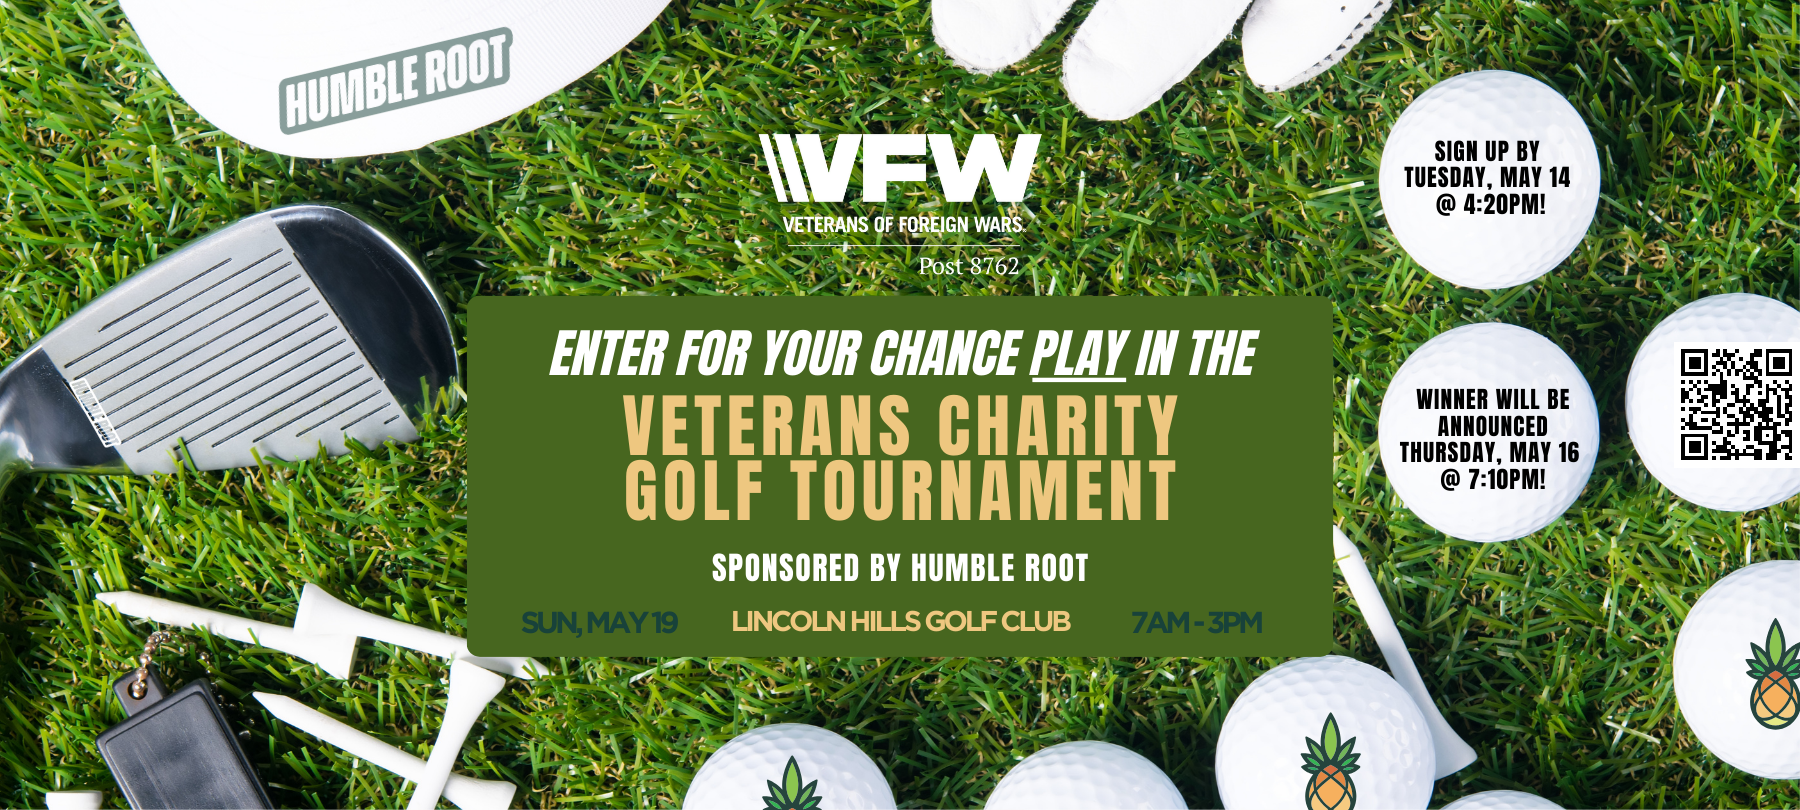 Enter for your chance to play in the Veterans Charity Golf Tournament